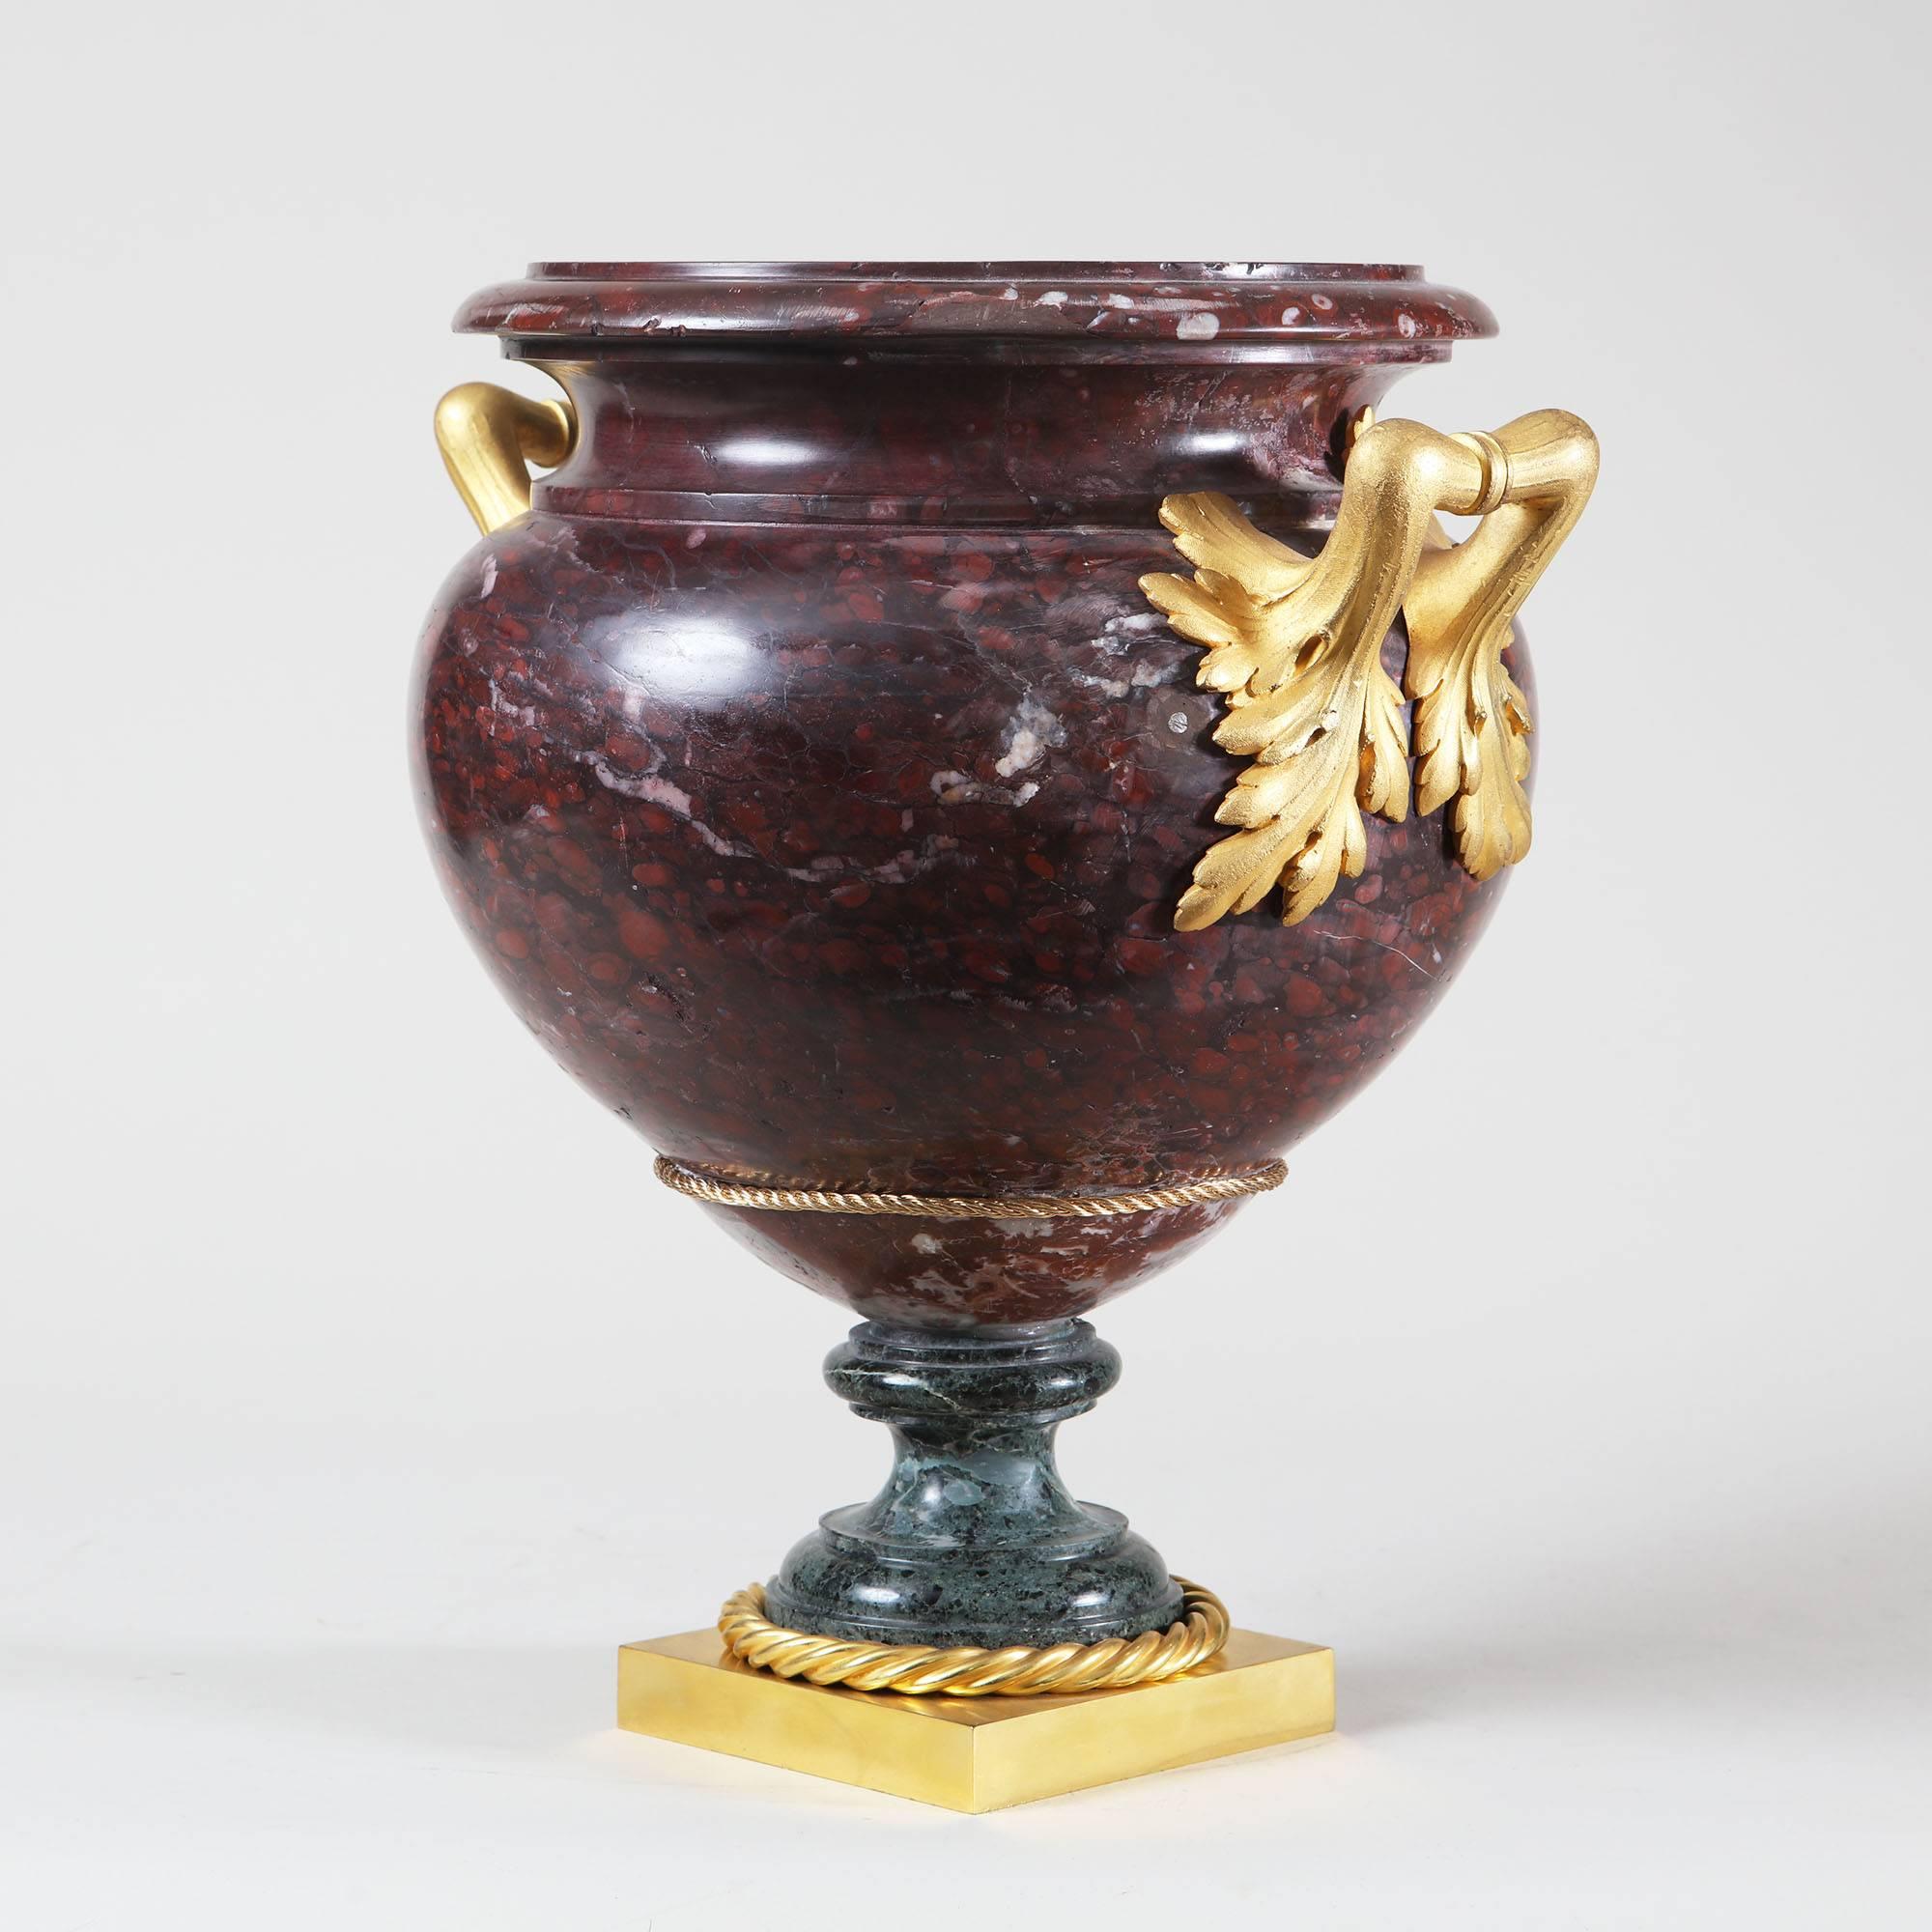 A Rouge Griotte Marble and Green Marble Urn with Ormolu Mounts
The top antique, the base later. 

Measures: 38 cm high, 36 cm wide, 30 cm deep.